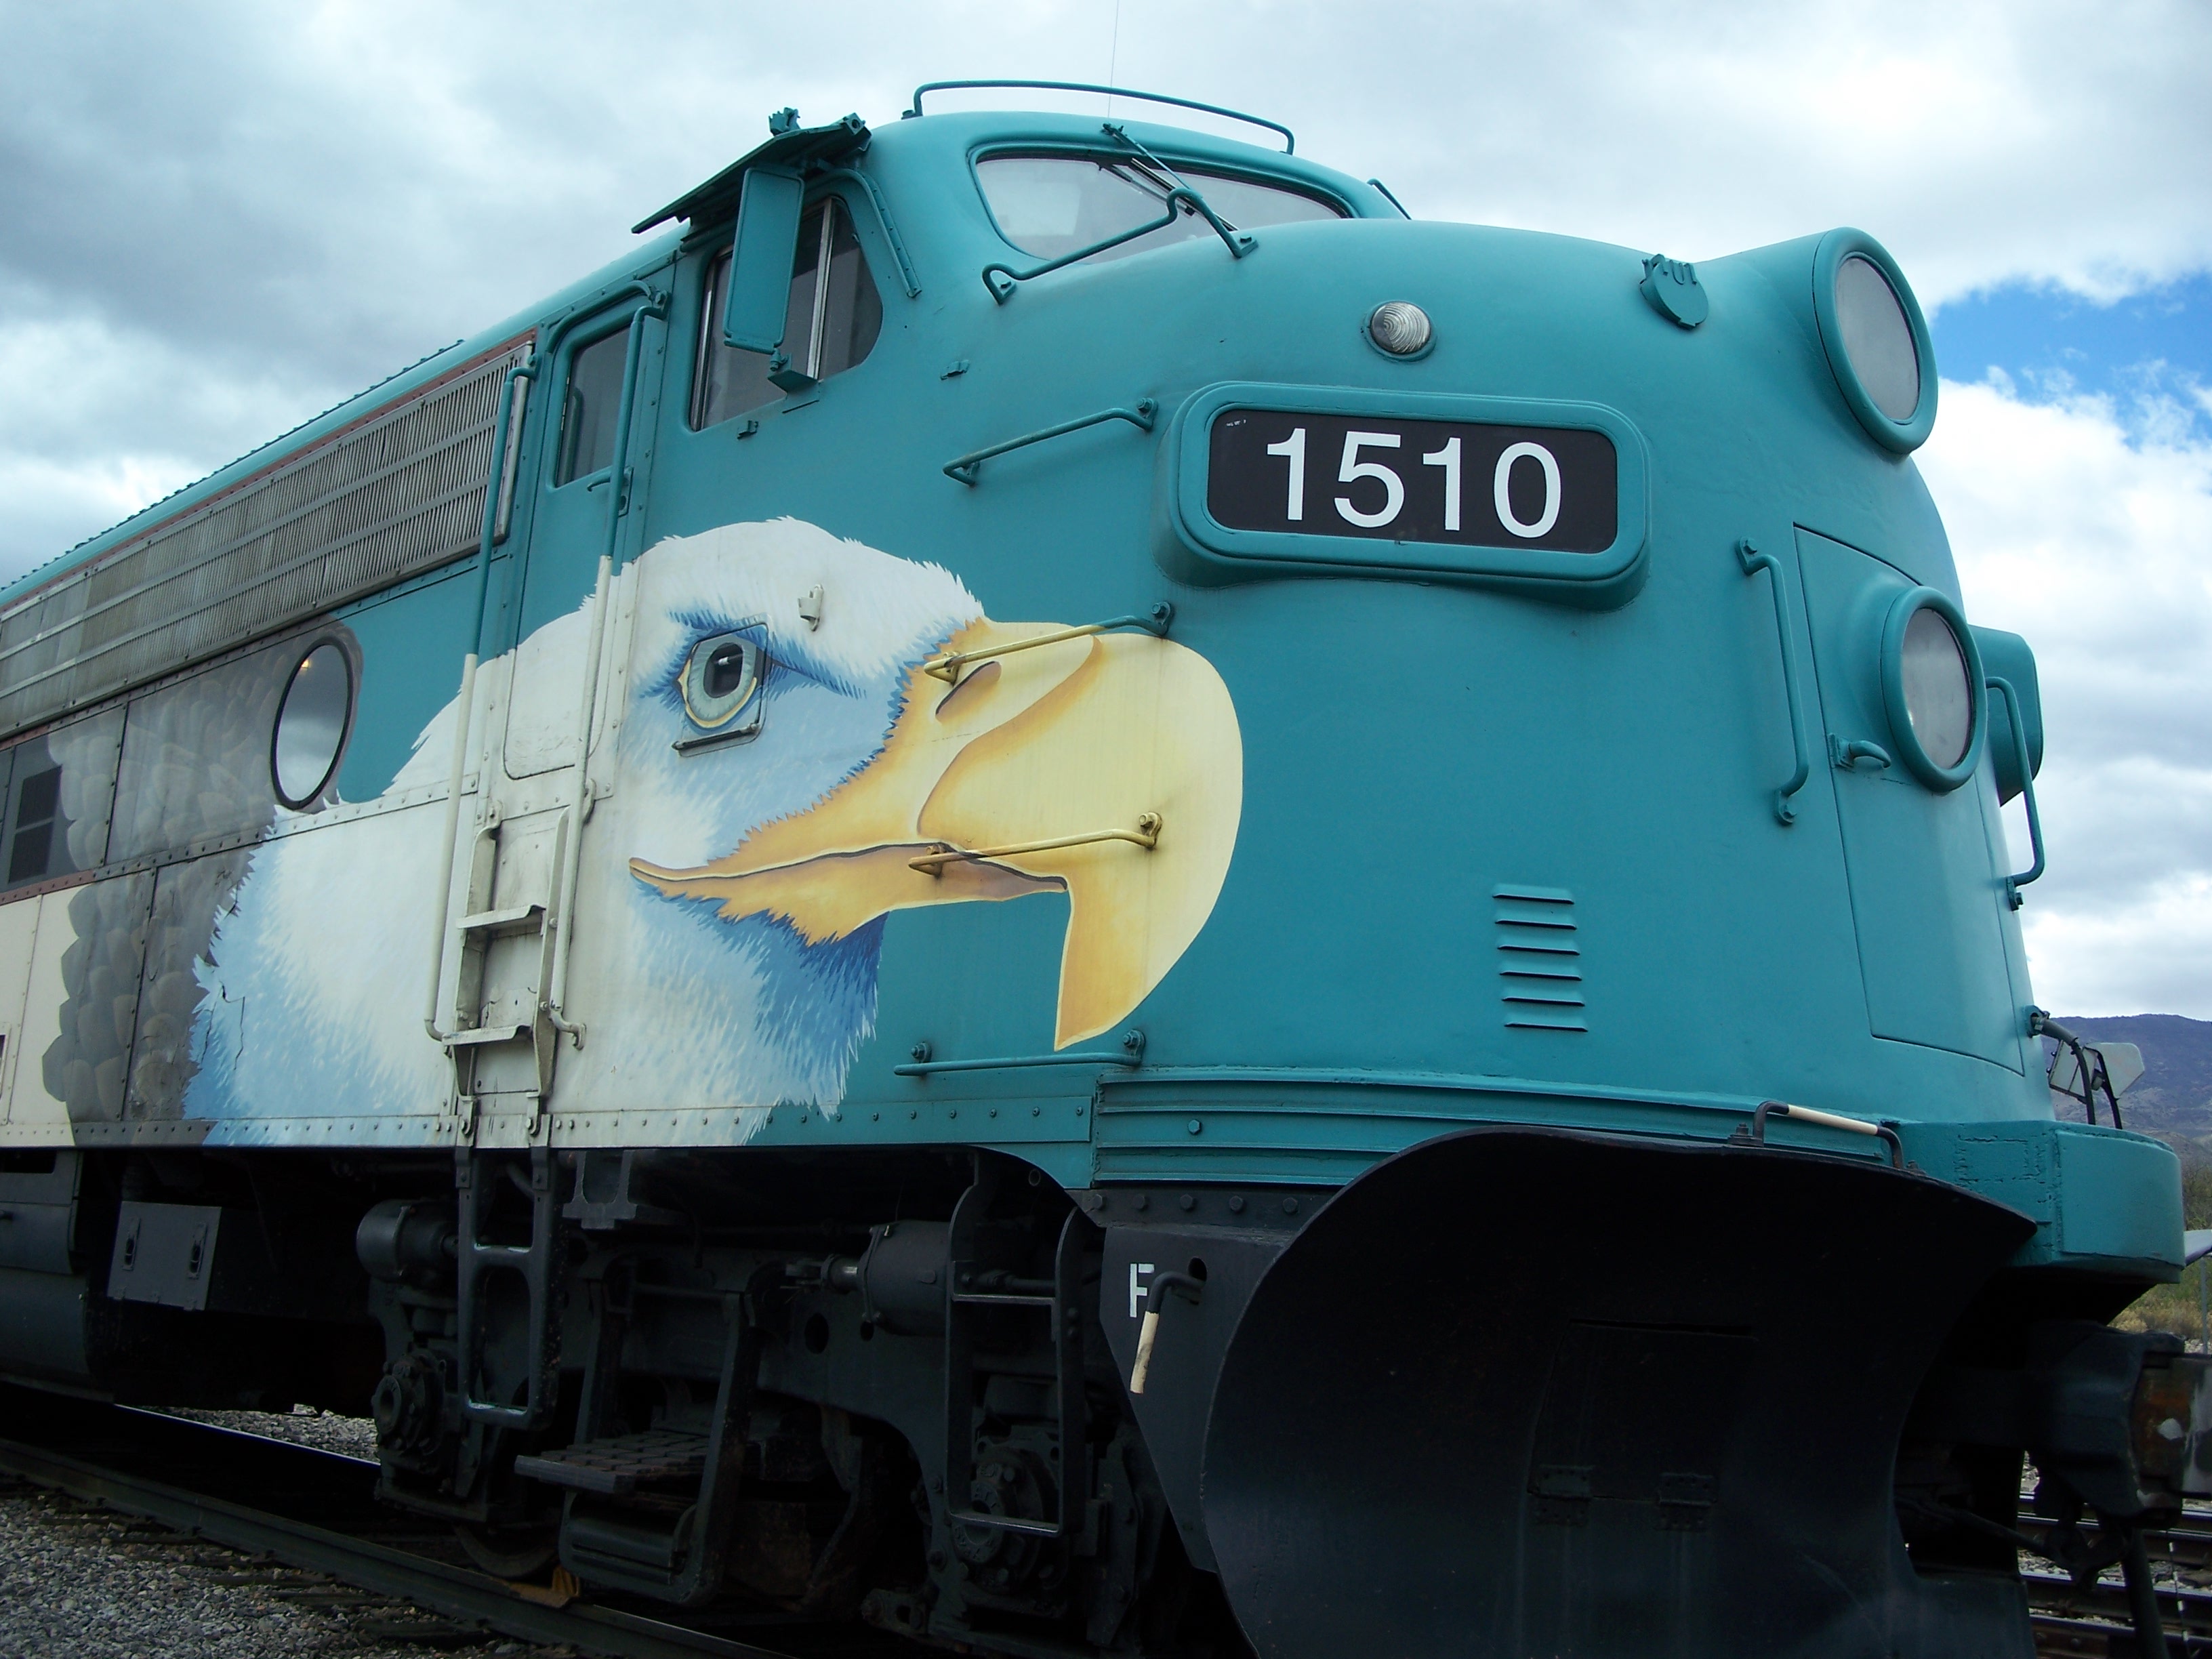 Train with eagle painted on the side. 